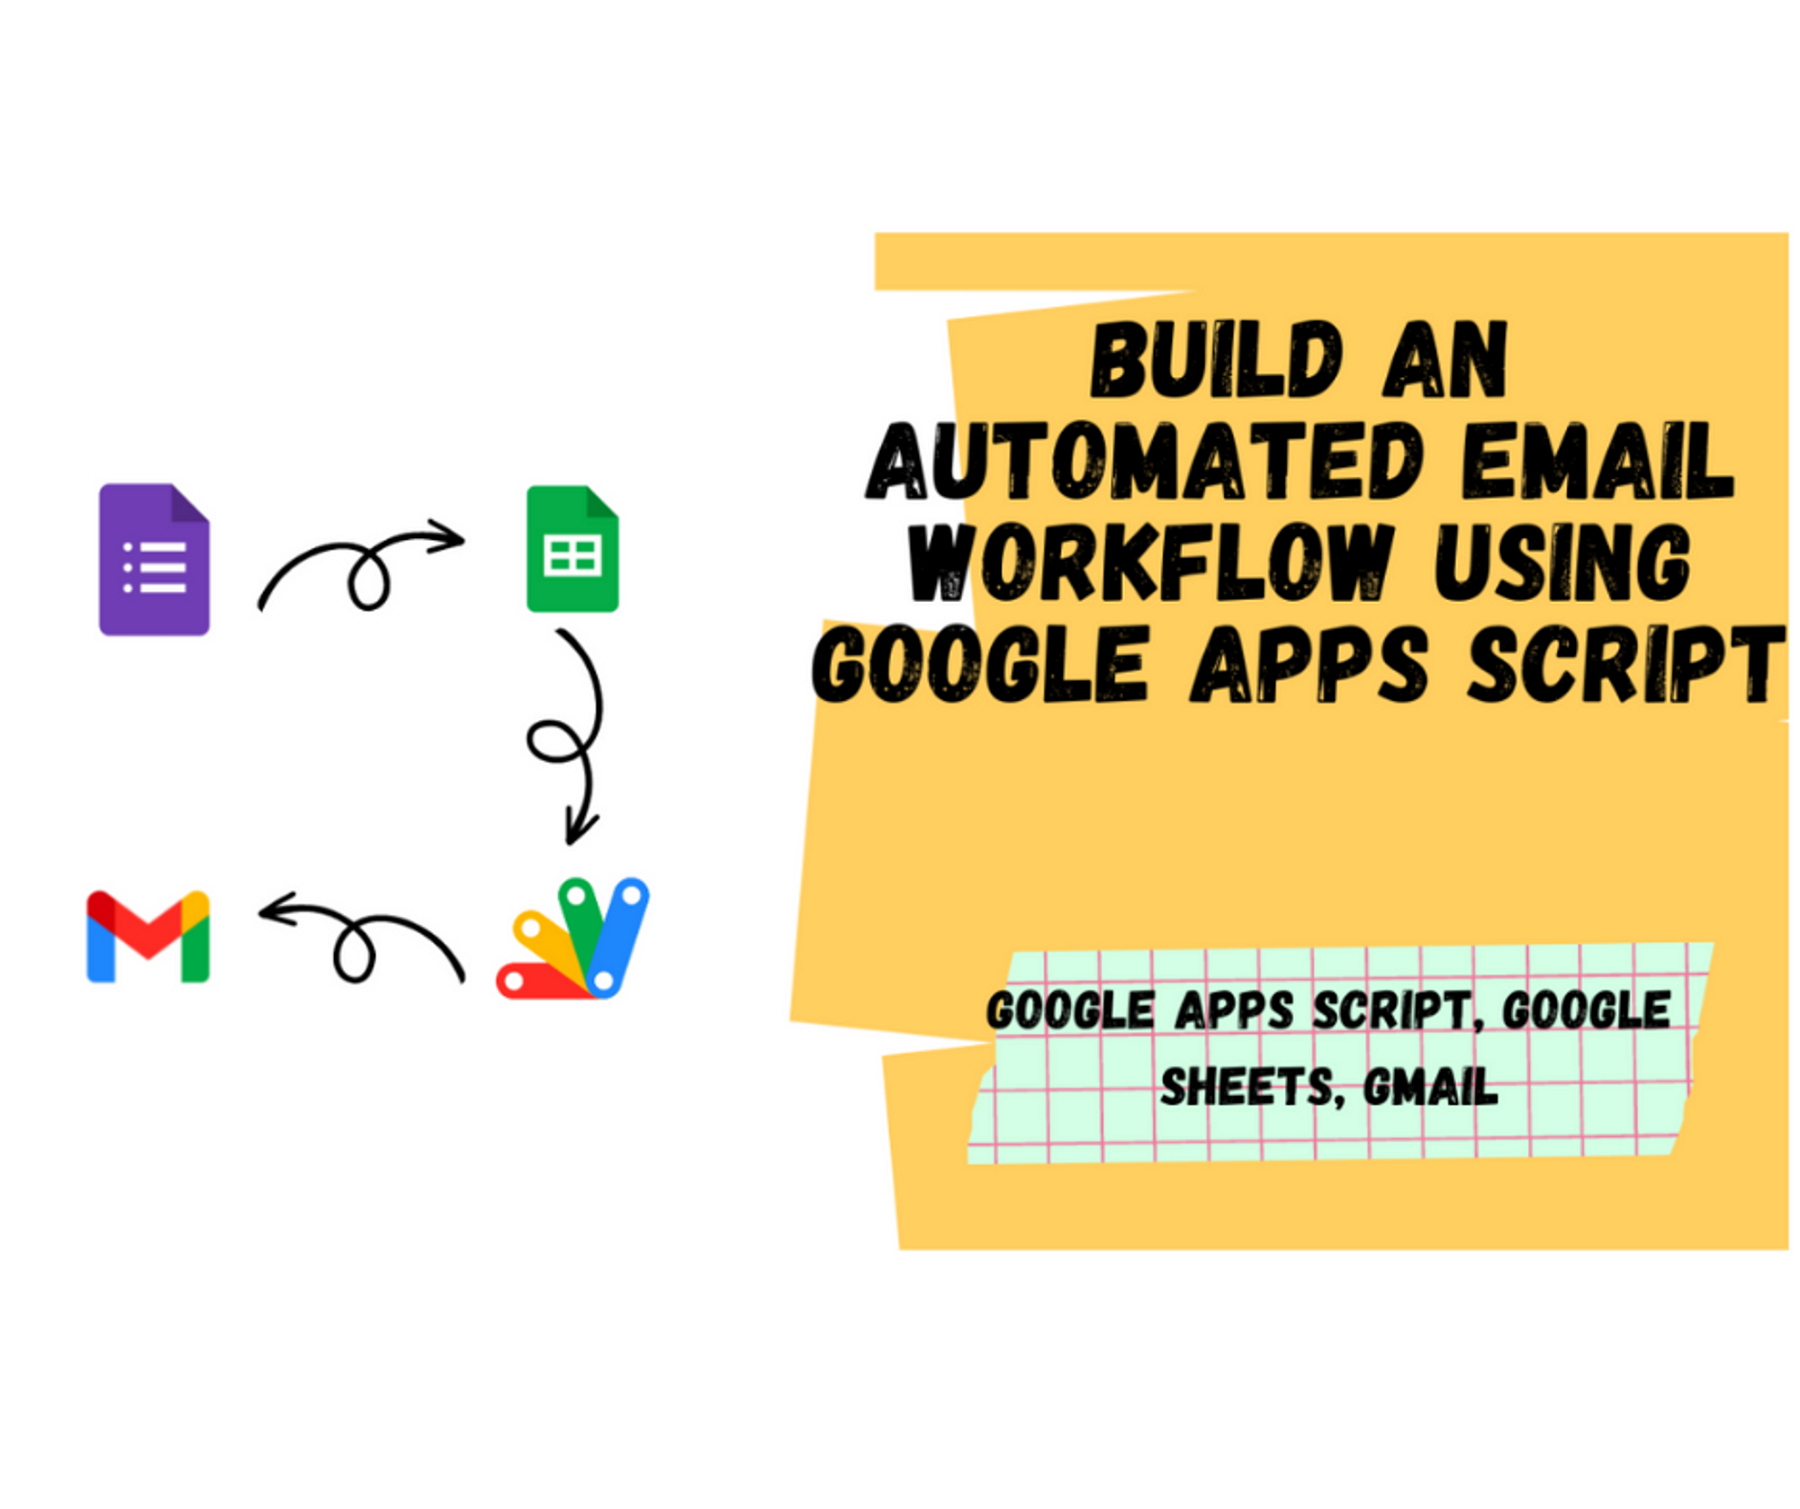 Build an Automated Email Workflow using Google Apps Script-Part 1